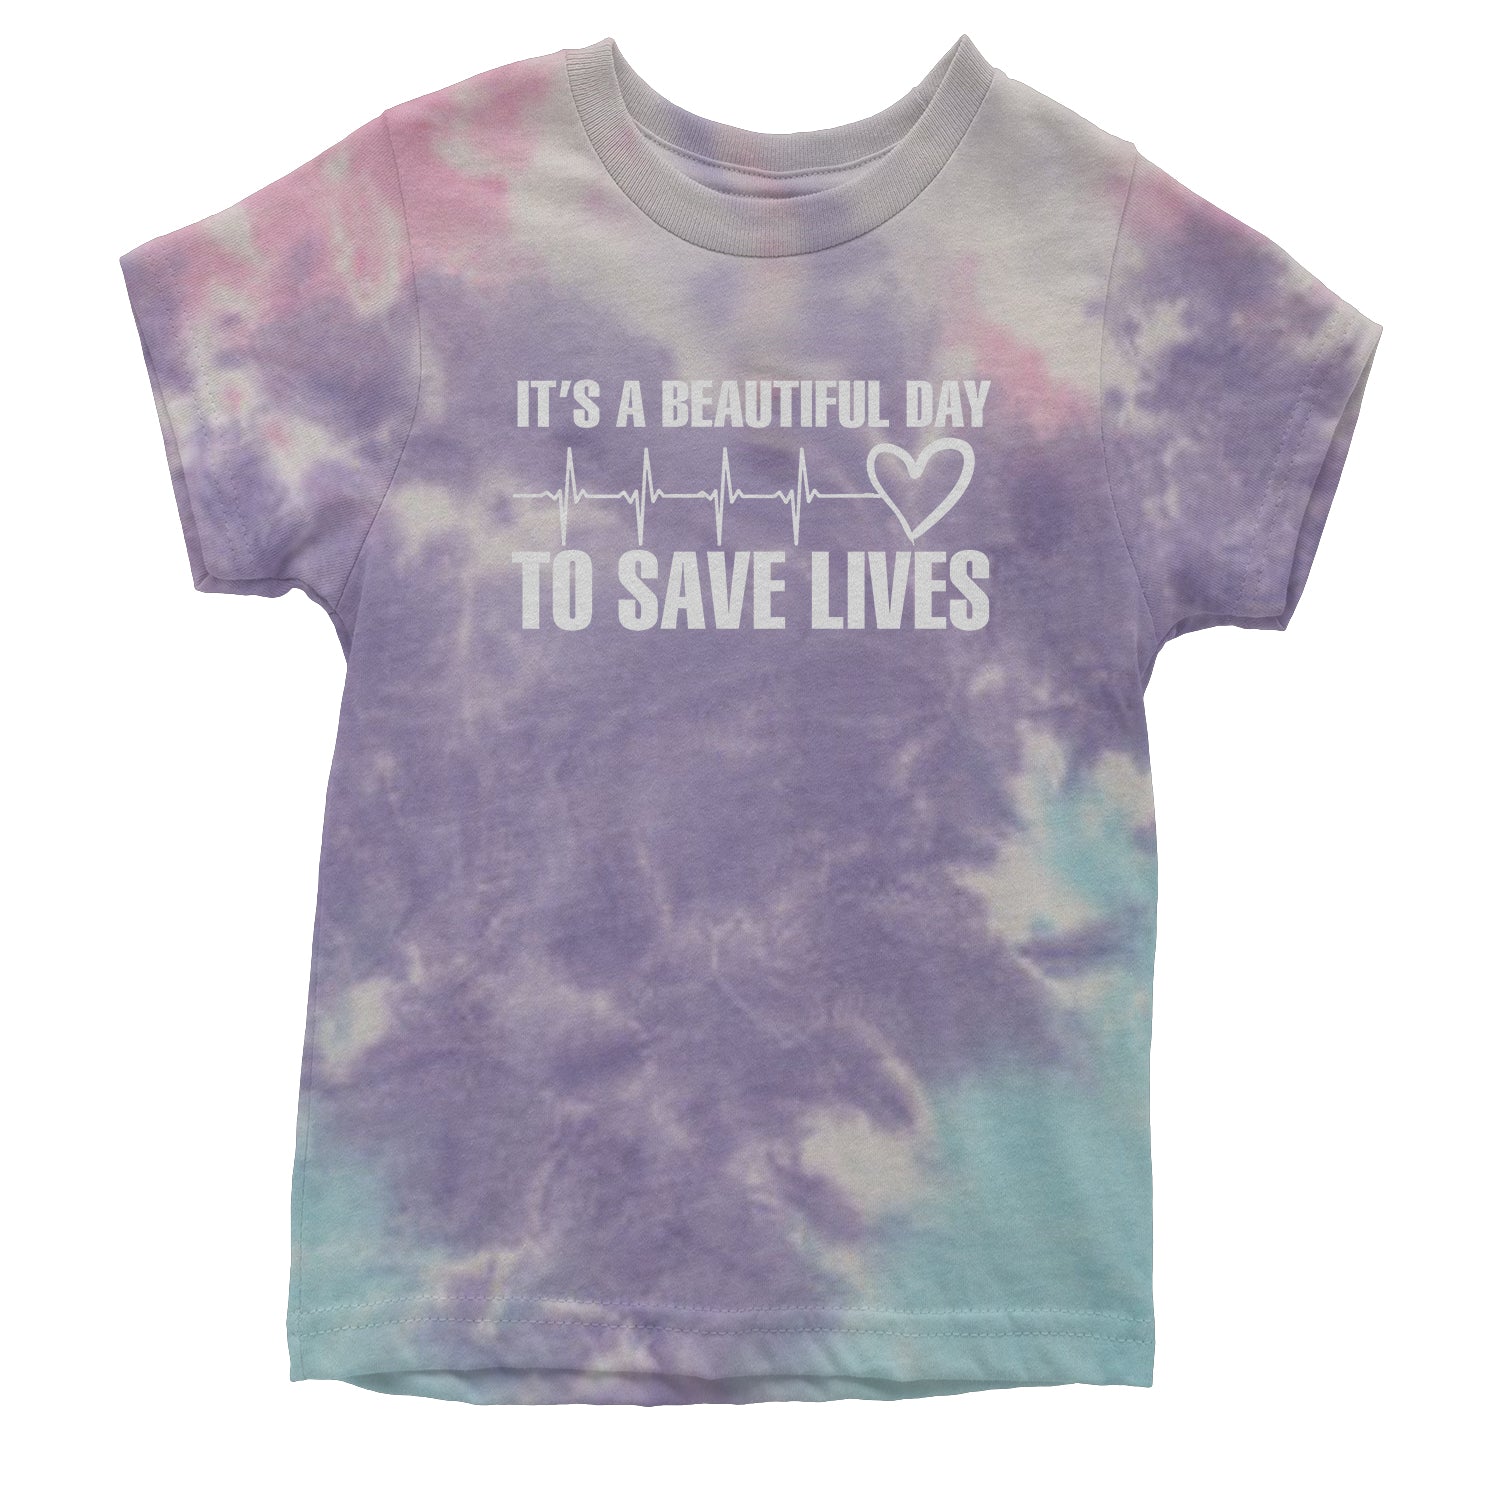 It's A Beautiful Day To Save Lives (White Print) Youth T-shirt #expressiontees by Expression Tees